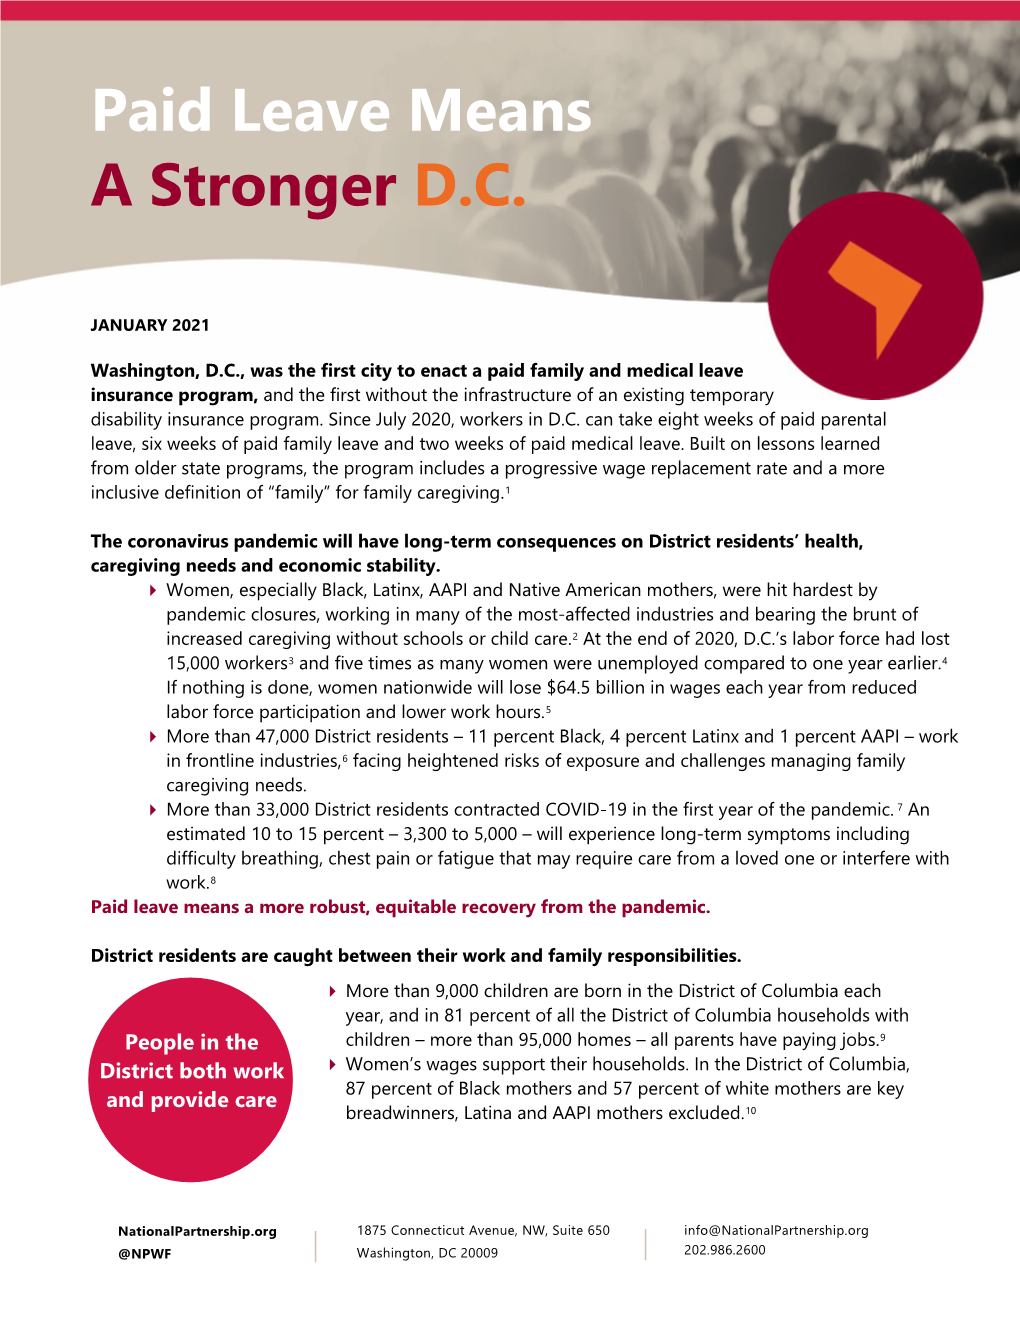 Paid Leave Means a Stronger D.C